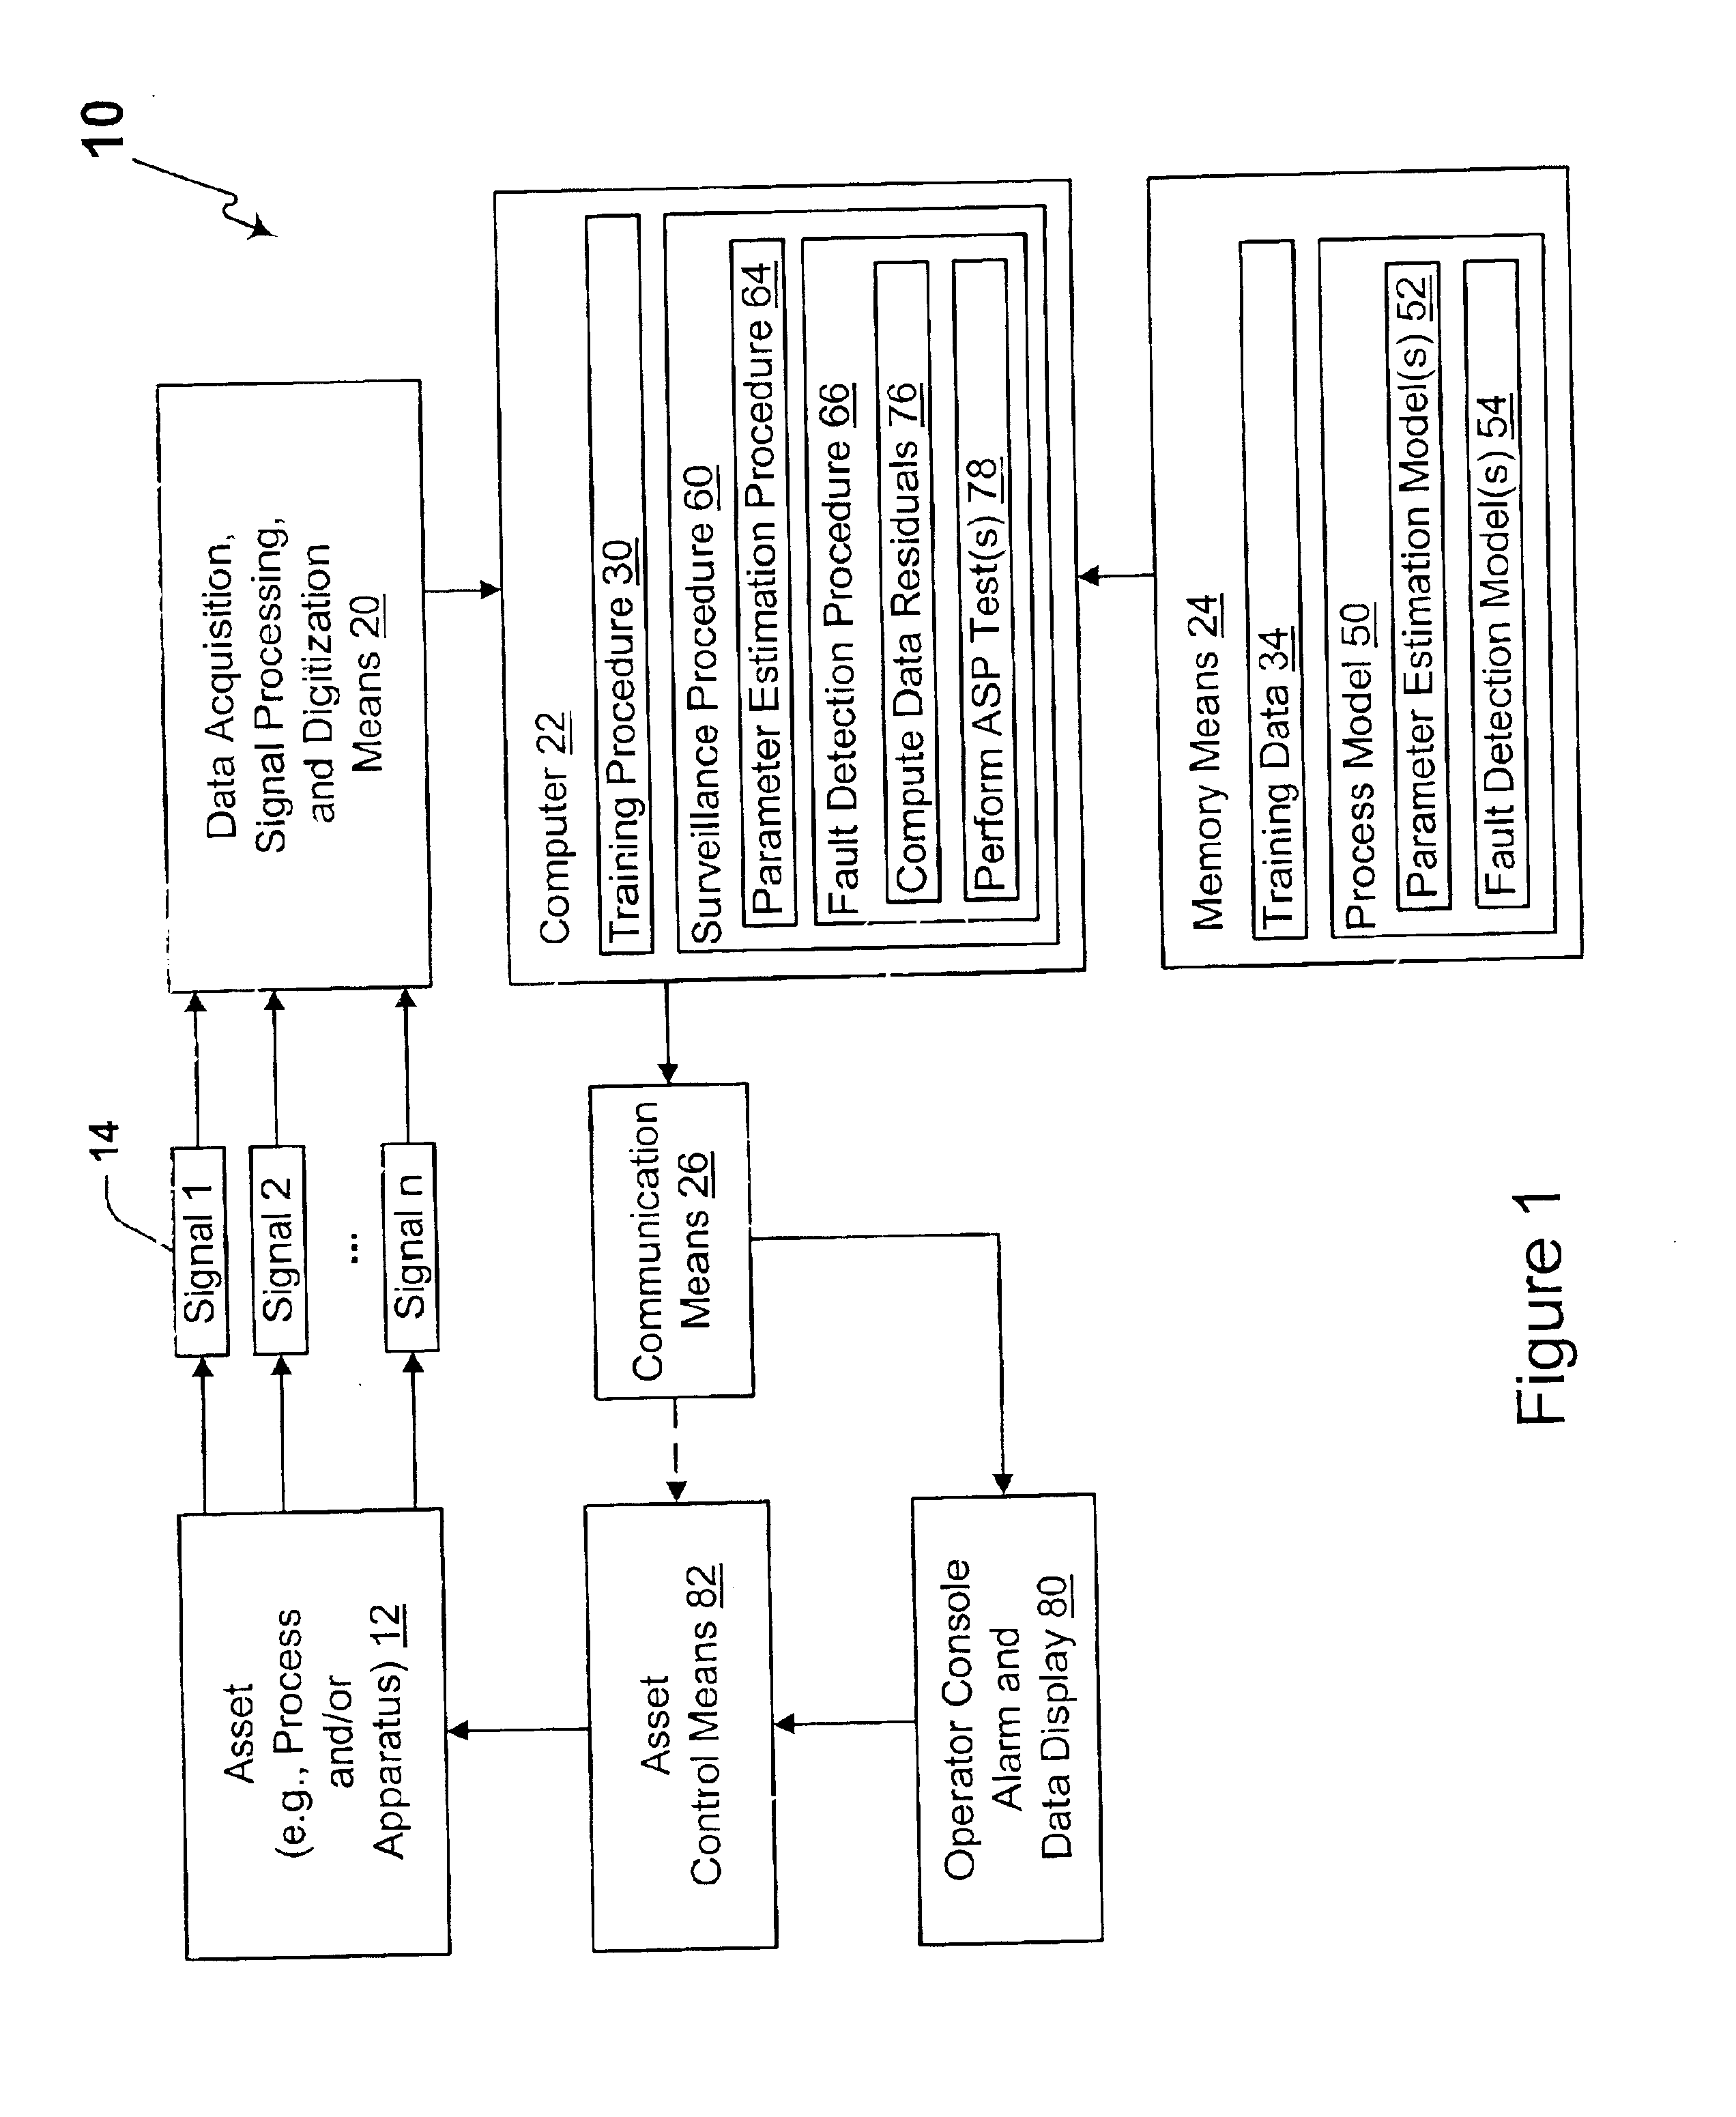 Surveillance system and method having an adaptive sequential probability fault detection test